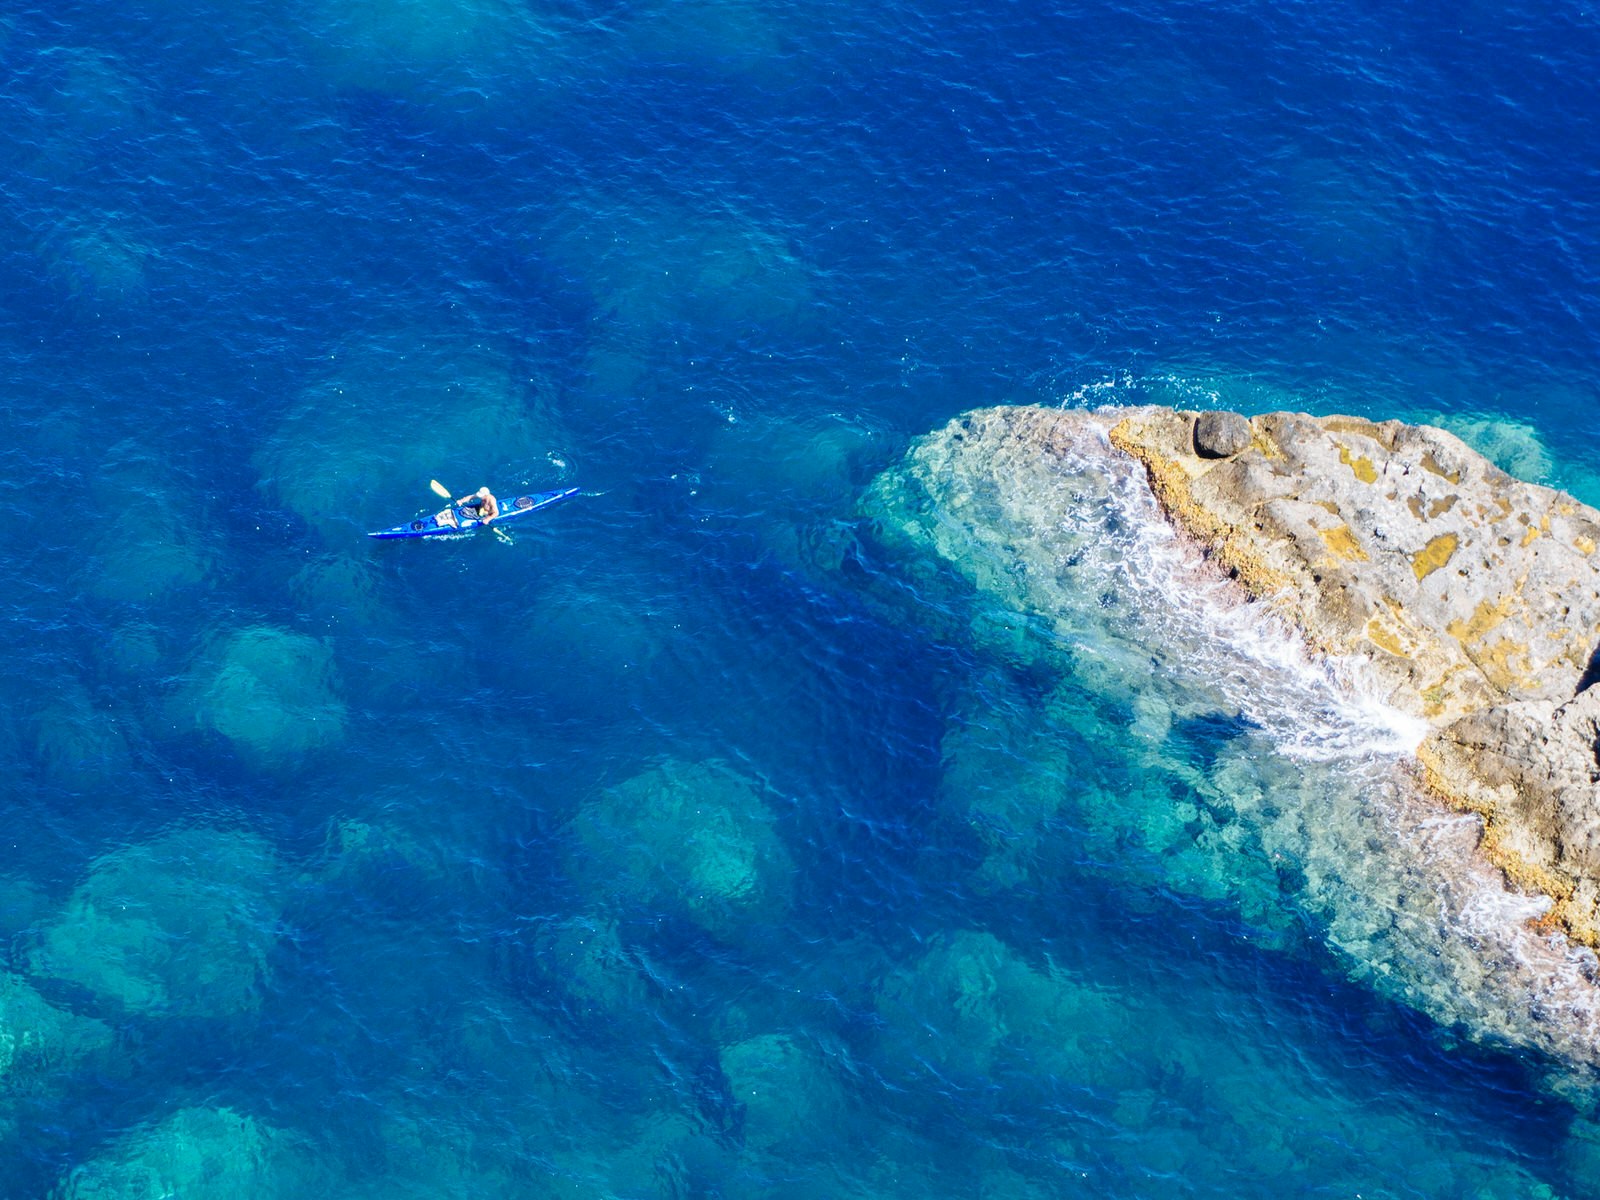 A solo kayaker surrounded by deep blue sea and a single rocky outcrop; as viewed from above.